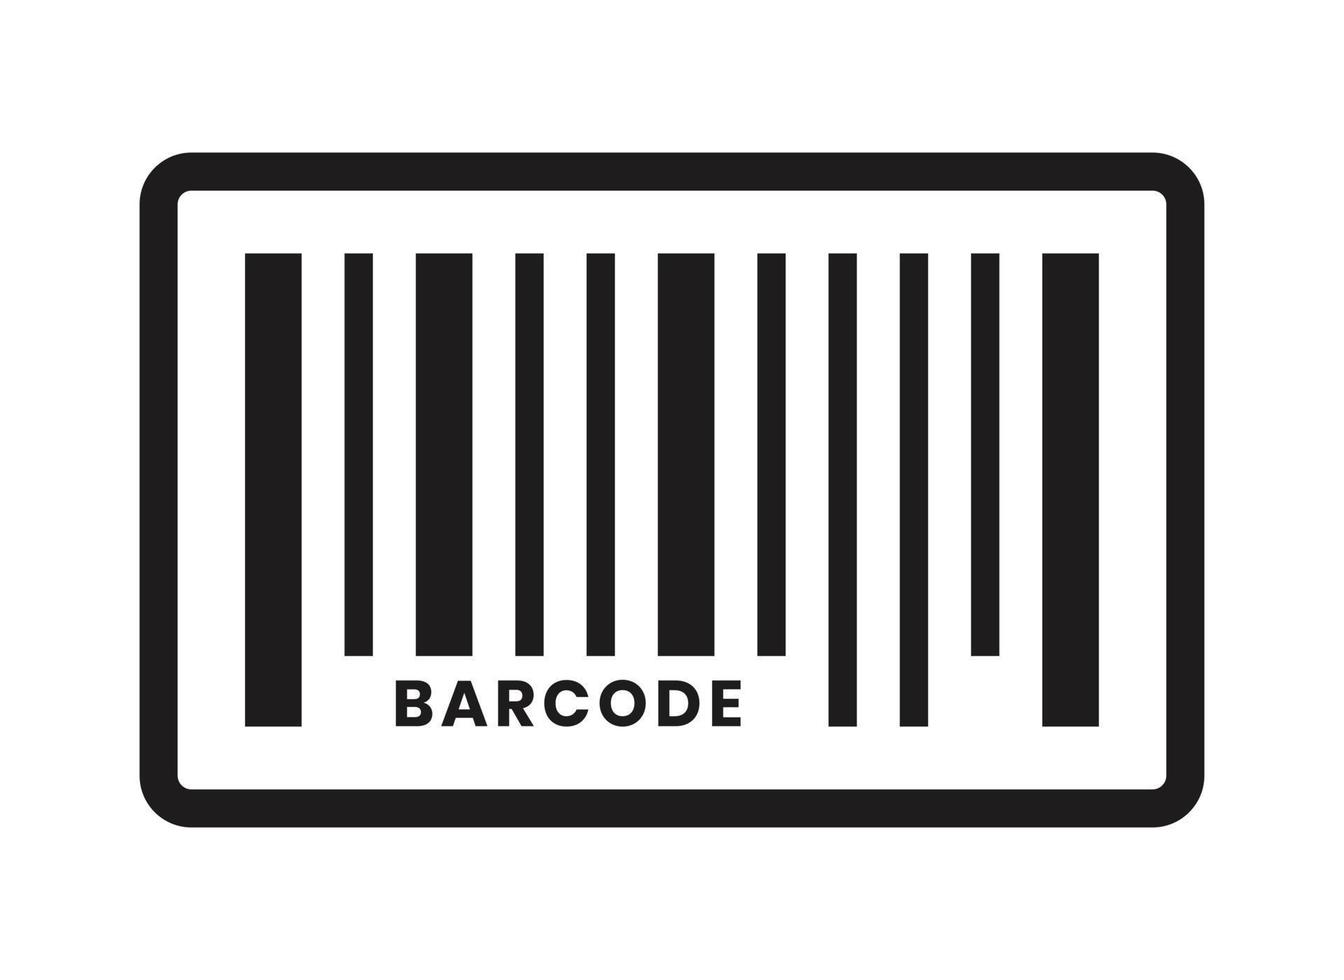 Line art icon a business inventory barcode or bar code for apps and websites vector